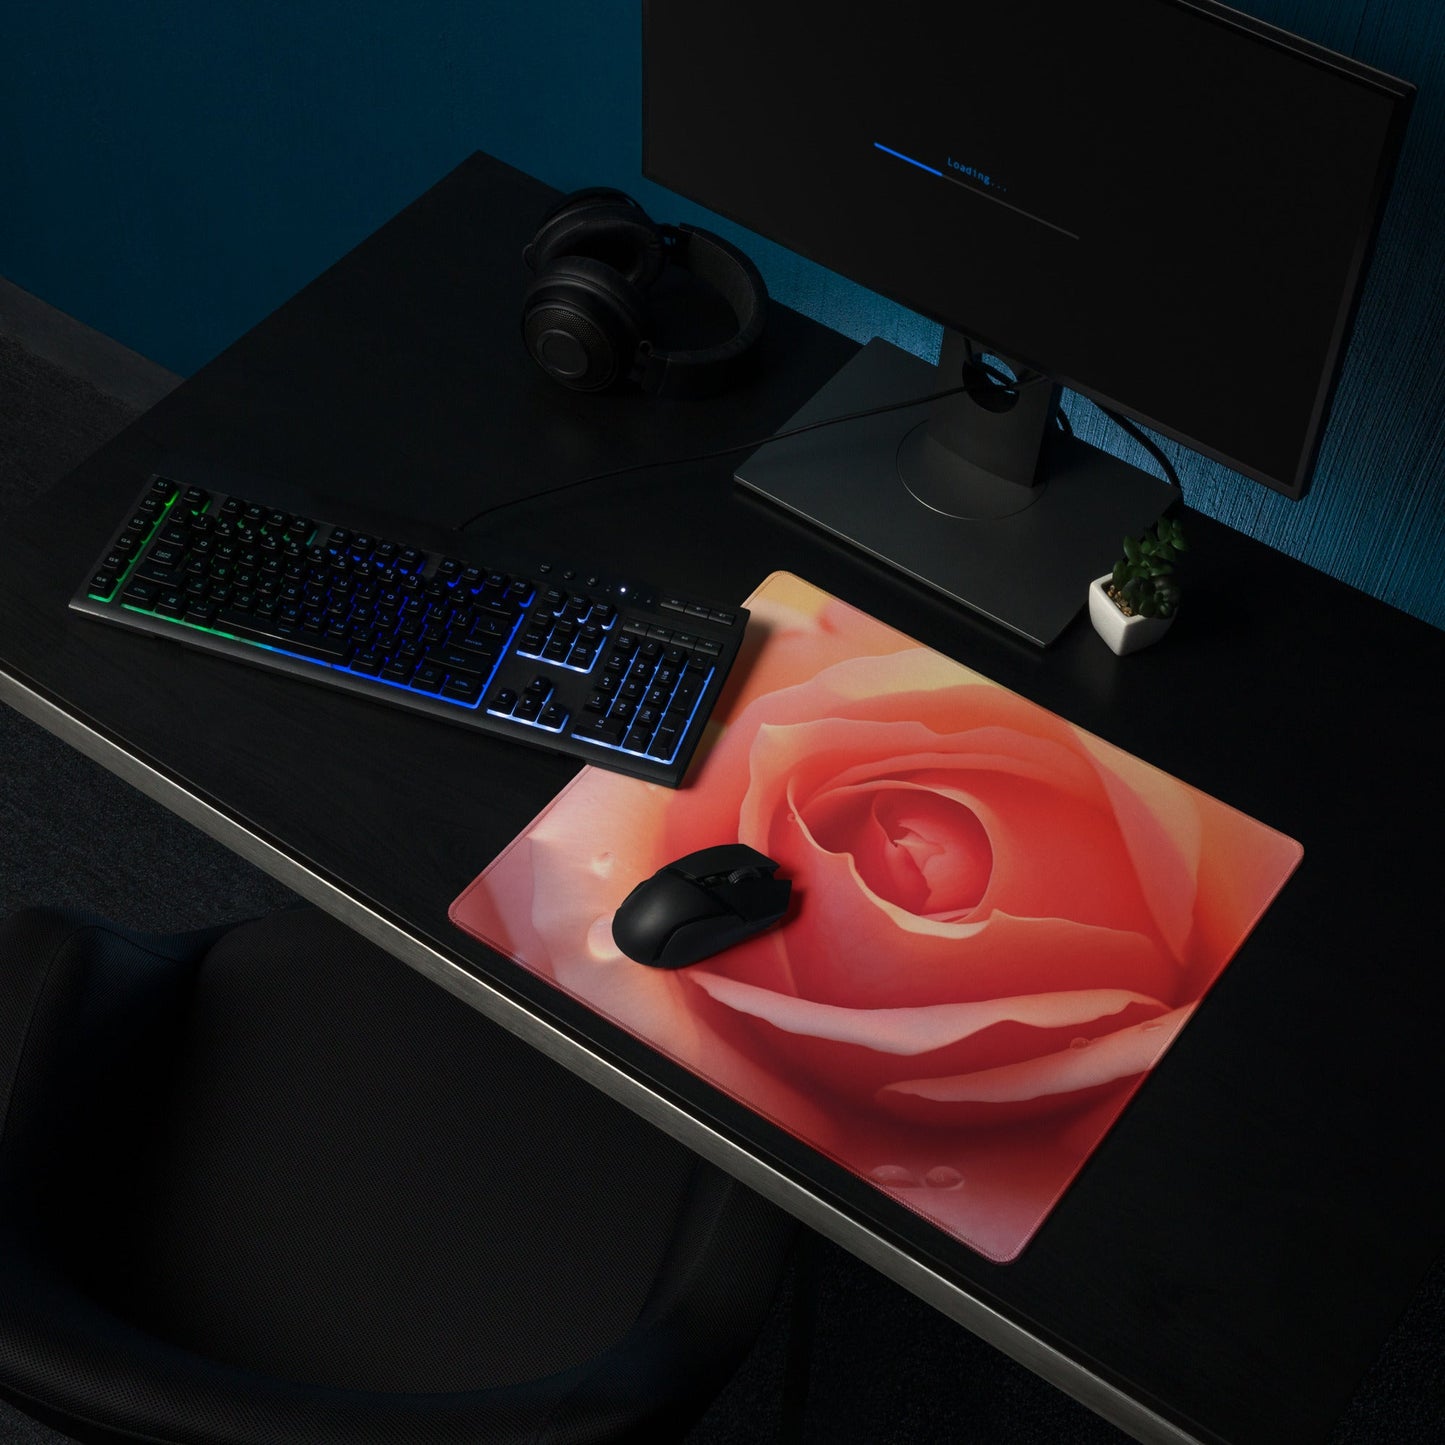 18″×16″ 2 Pink Rose Gaming mouse pad by Neduz Designs